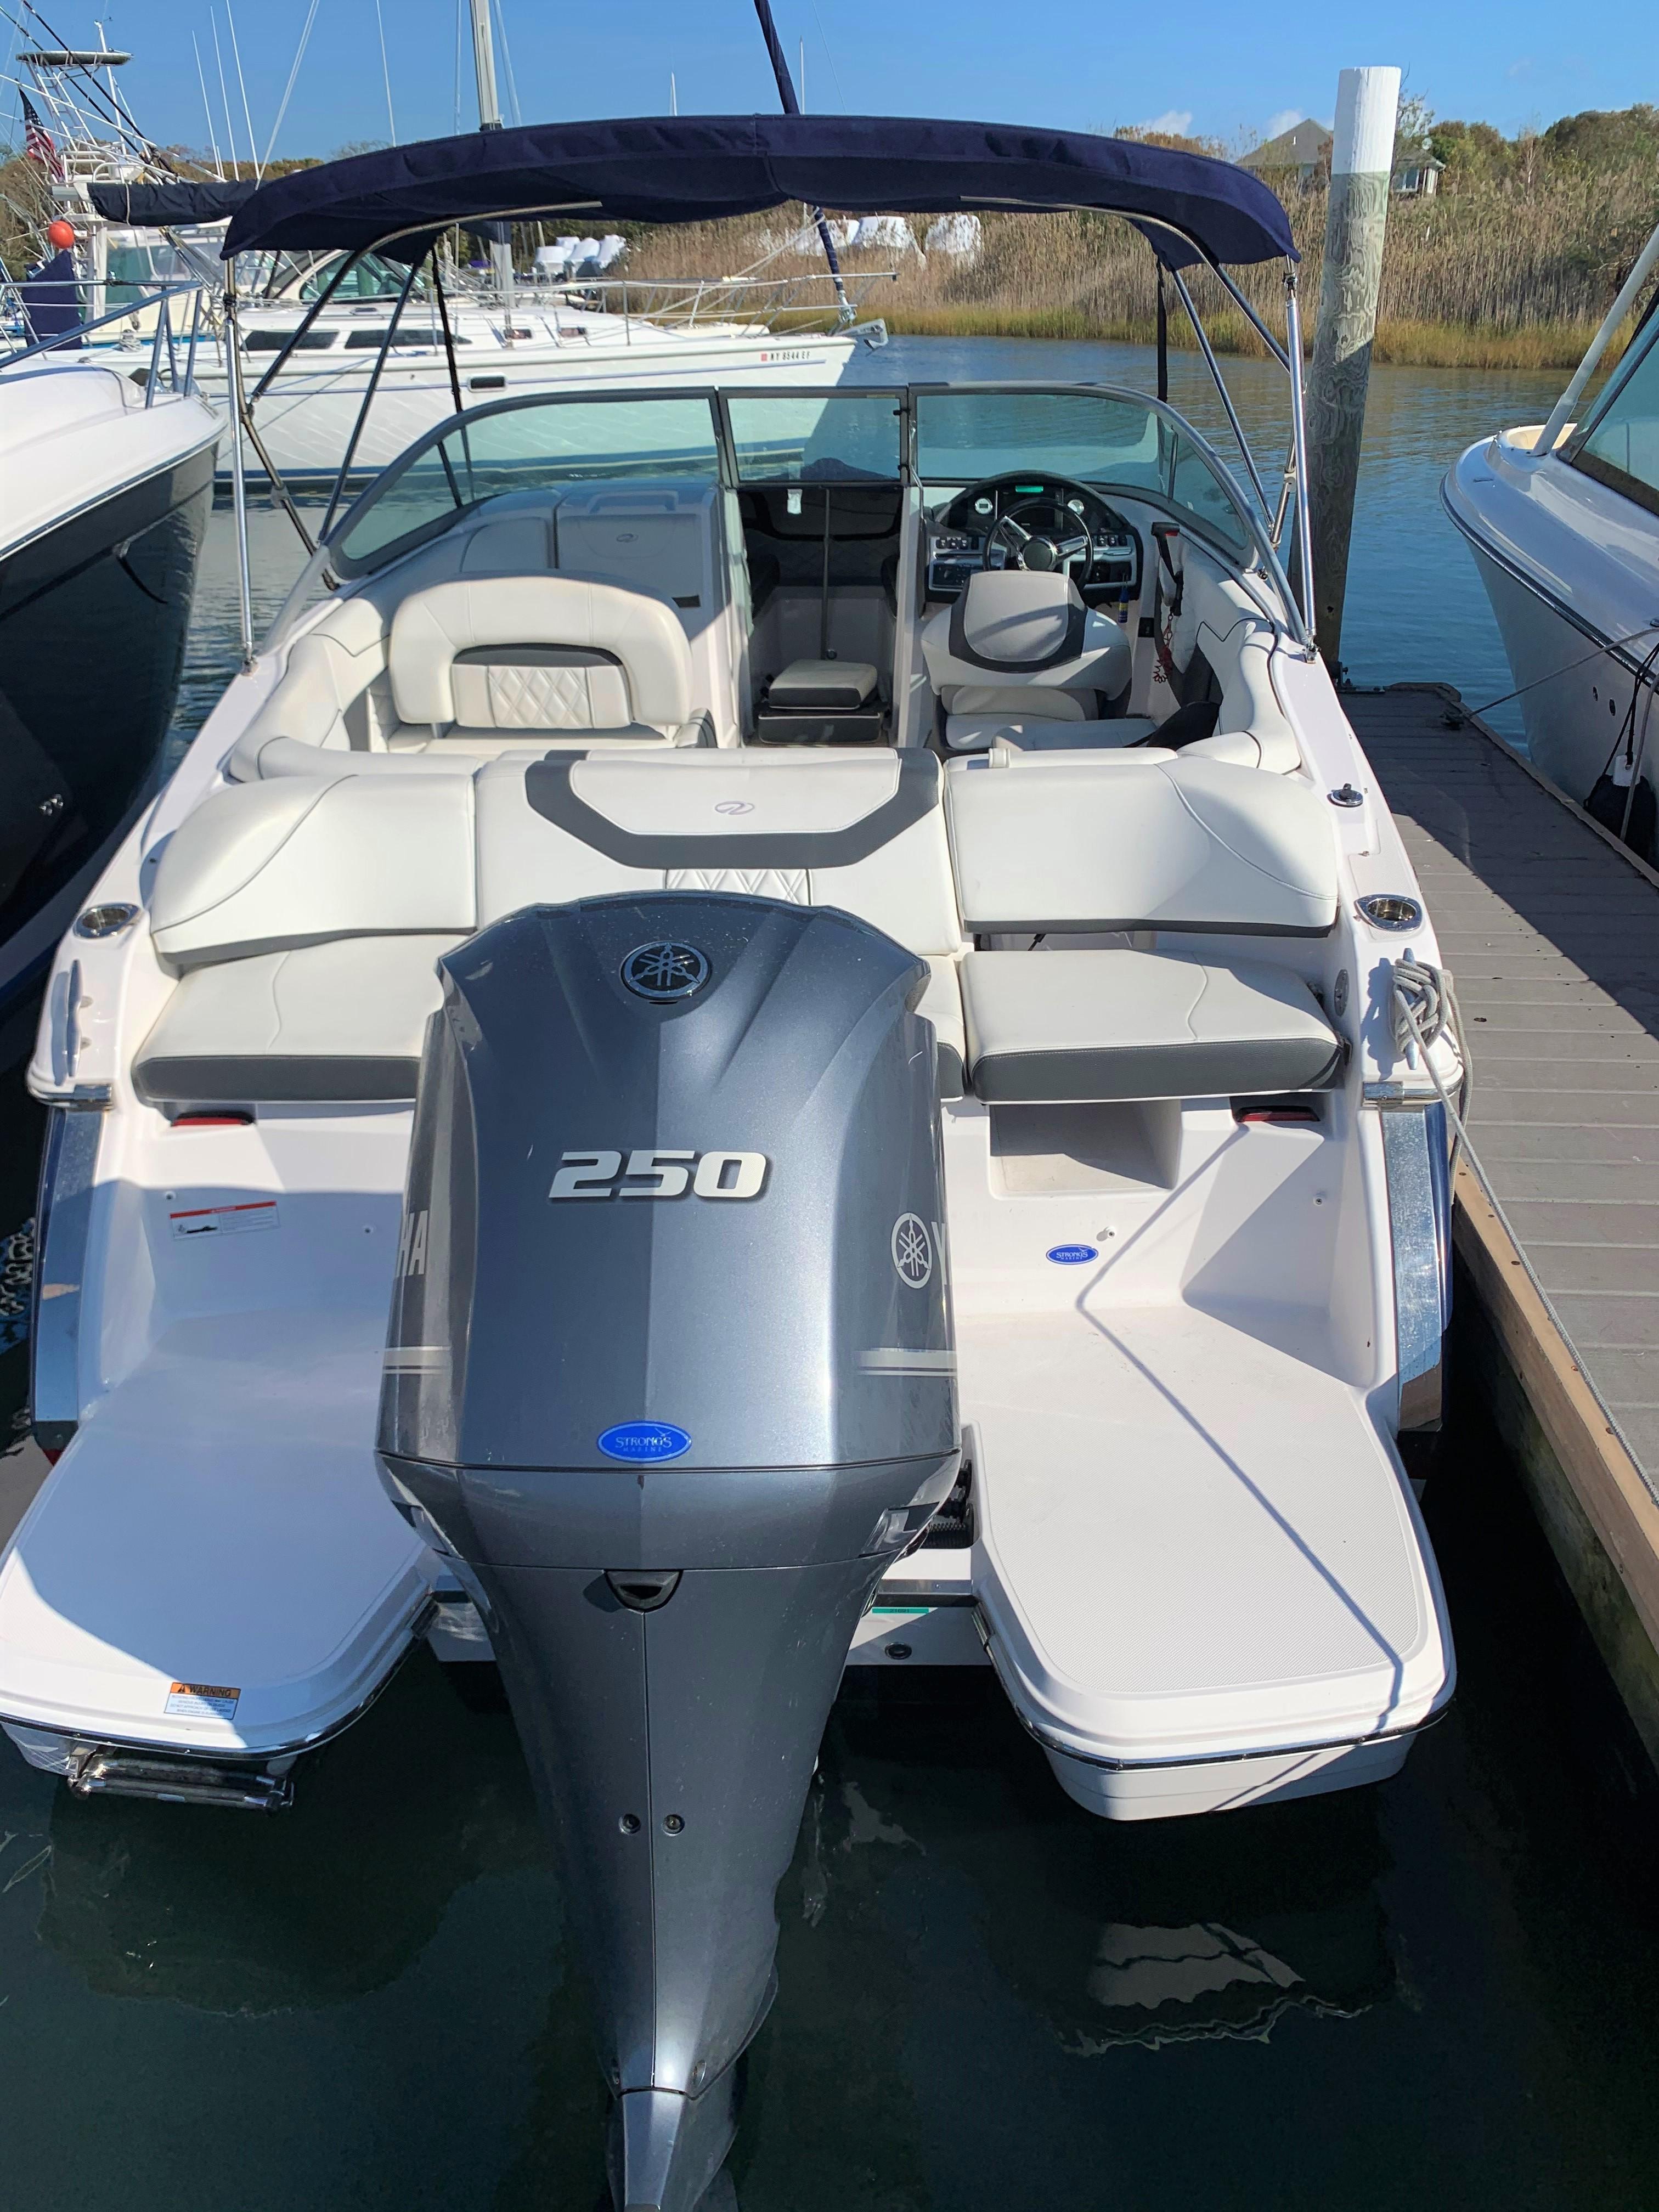 2019 Regal 23 OBX Bowrider for sale - YachtWorld